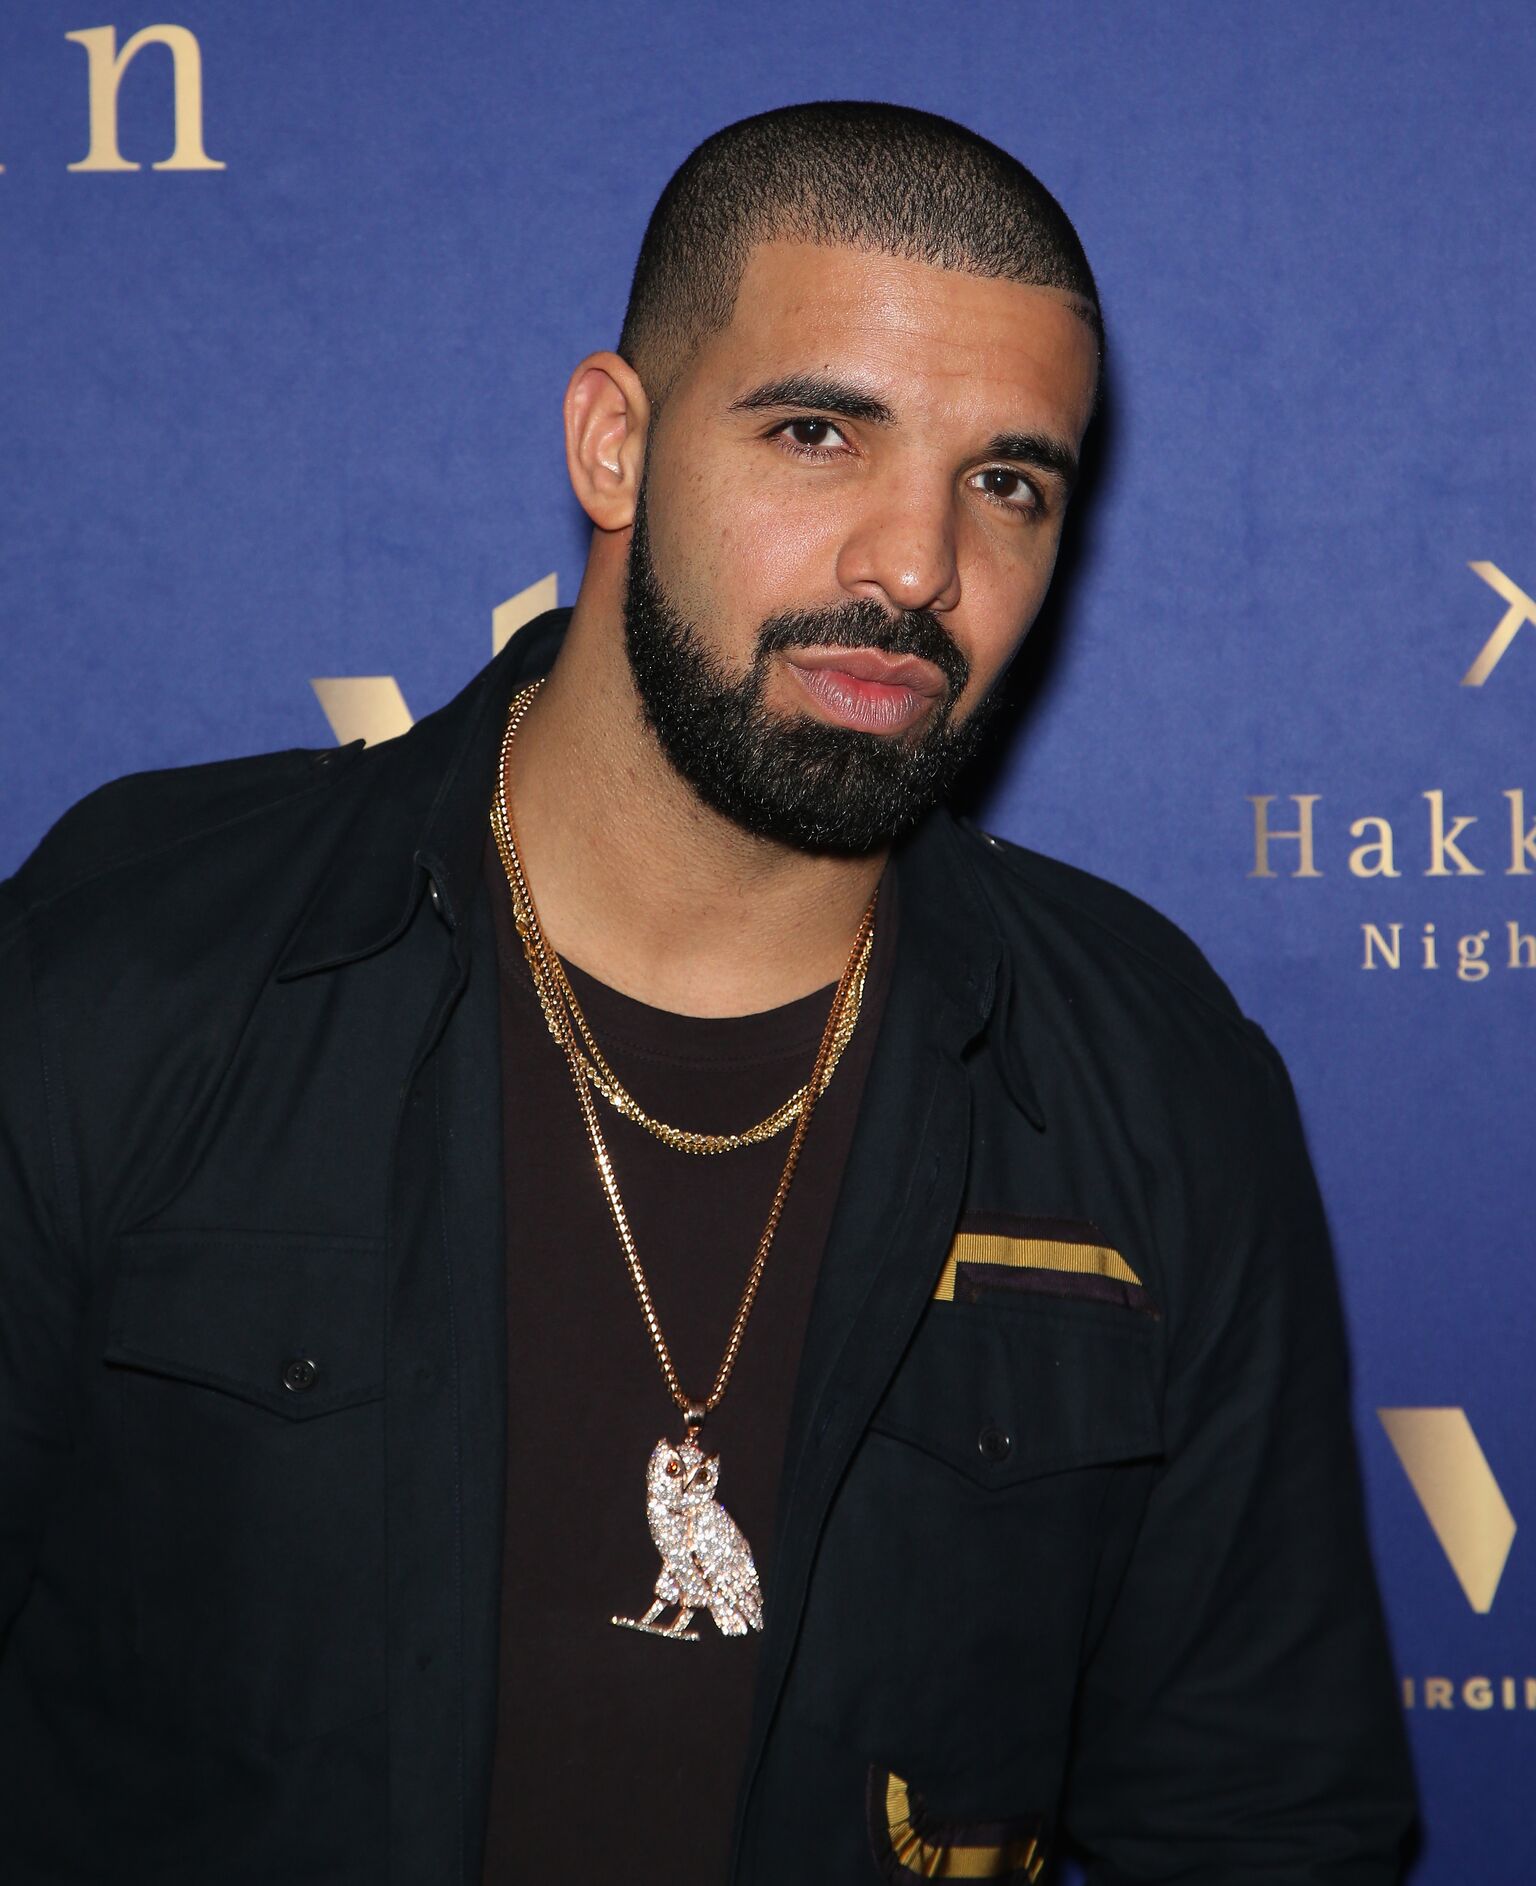 Recording artist Drake attends the after party for his concert at Hakkasan Las Vegas Nightclub at MGM Grand Hotel & Casino on September 12, 2016 | Photo: Getty Images